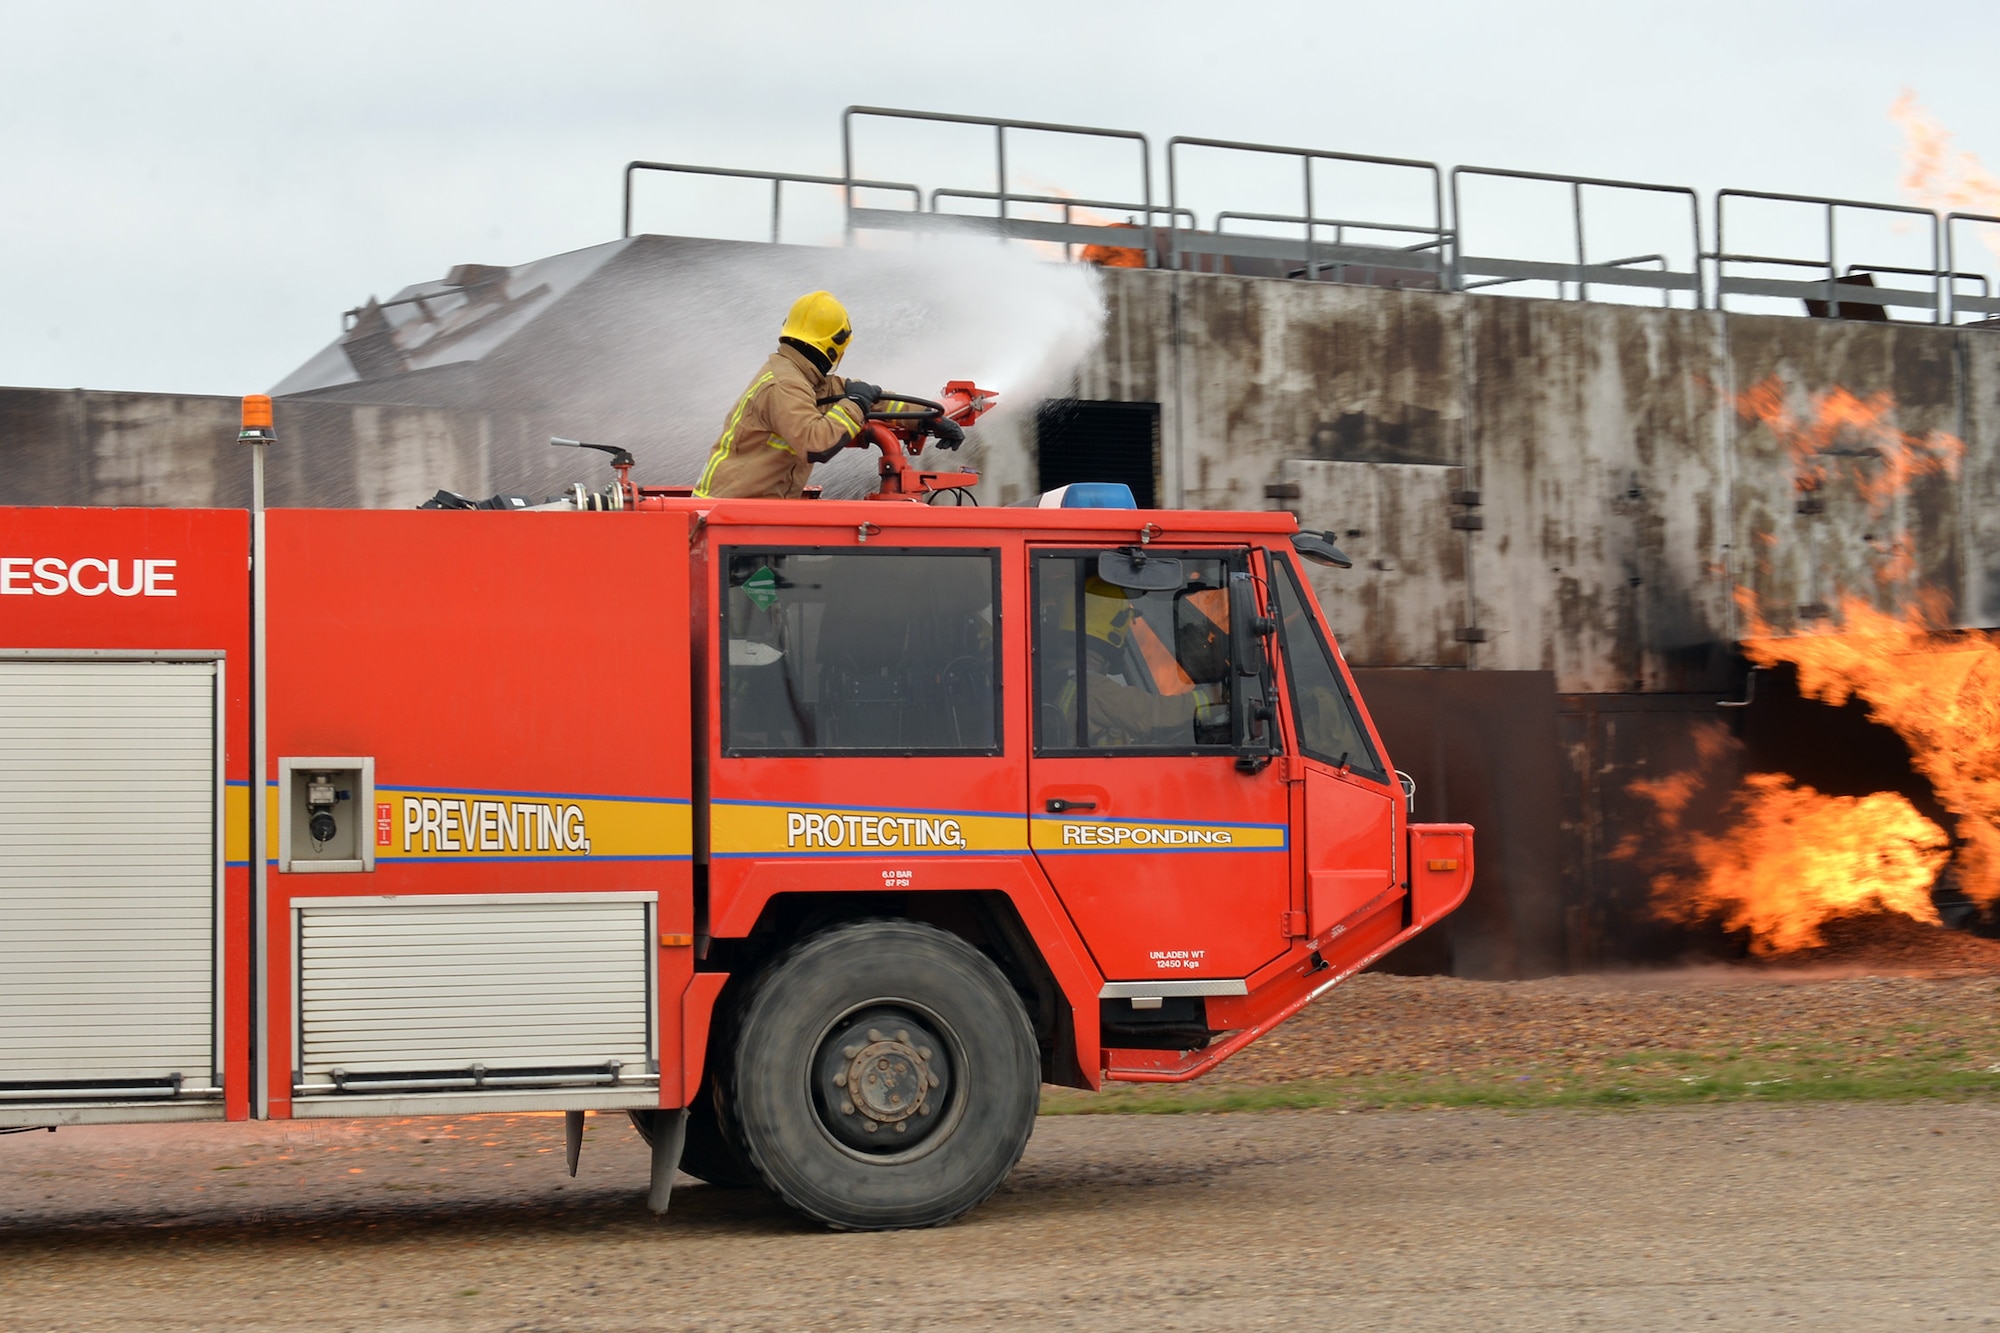 A firefighter from RAF Marham sprays water from a Royal Air Force fire truck onto a mock aircraft fire at the live fire training area on RAF Mildenhall, England, April 5, 2019. The British fire crew visited the base to gain experience on the live fire trainer. With the arrival of the F-35 and the regeneration at RAF Marham, their training facilities are under renovation and the visit served to provide vital training for the RAF firefighters, and aid in continuing to build vital working relationships between RAF Mildenhall and neighboring fire departments. (U.S. Air Force photo by Karen Abeyasekere)